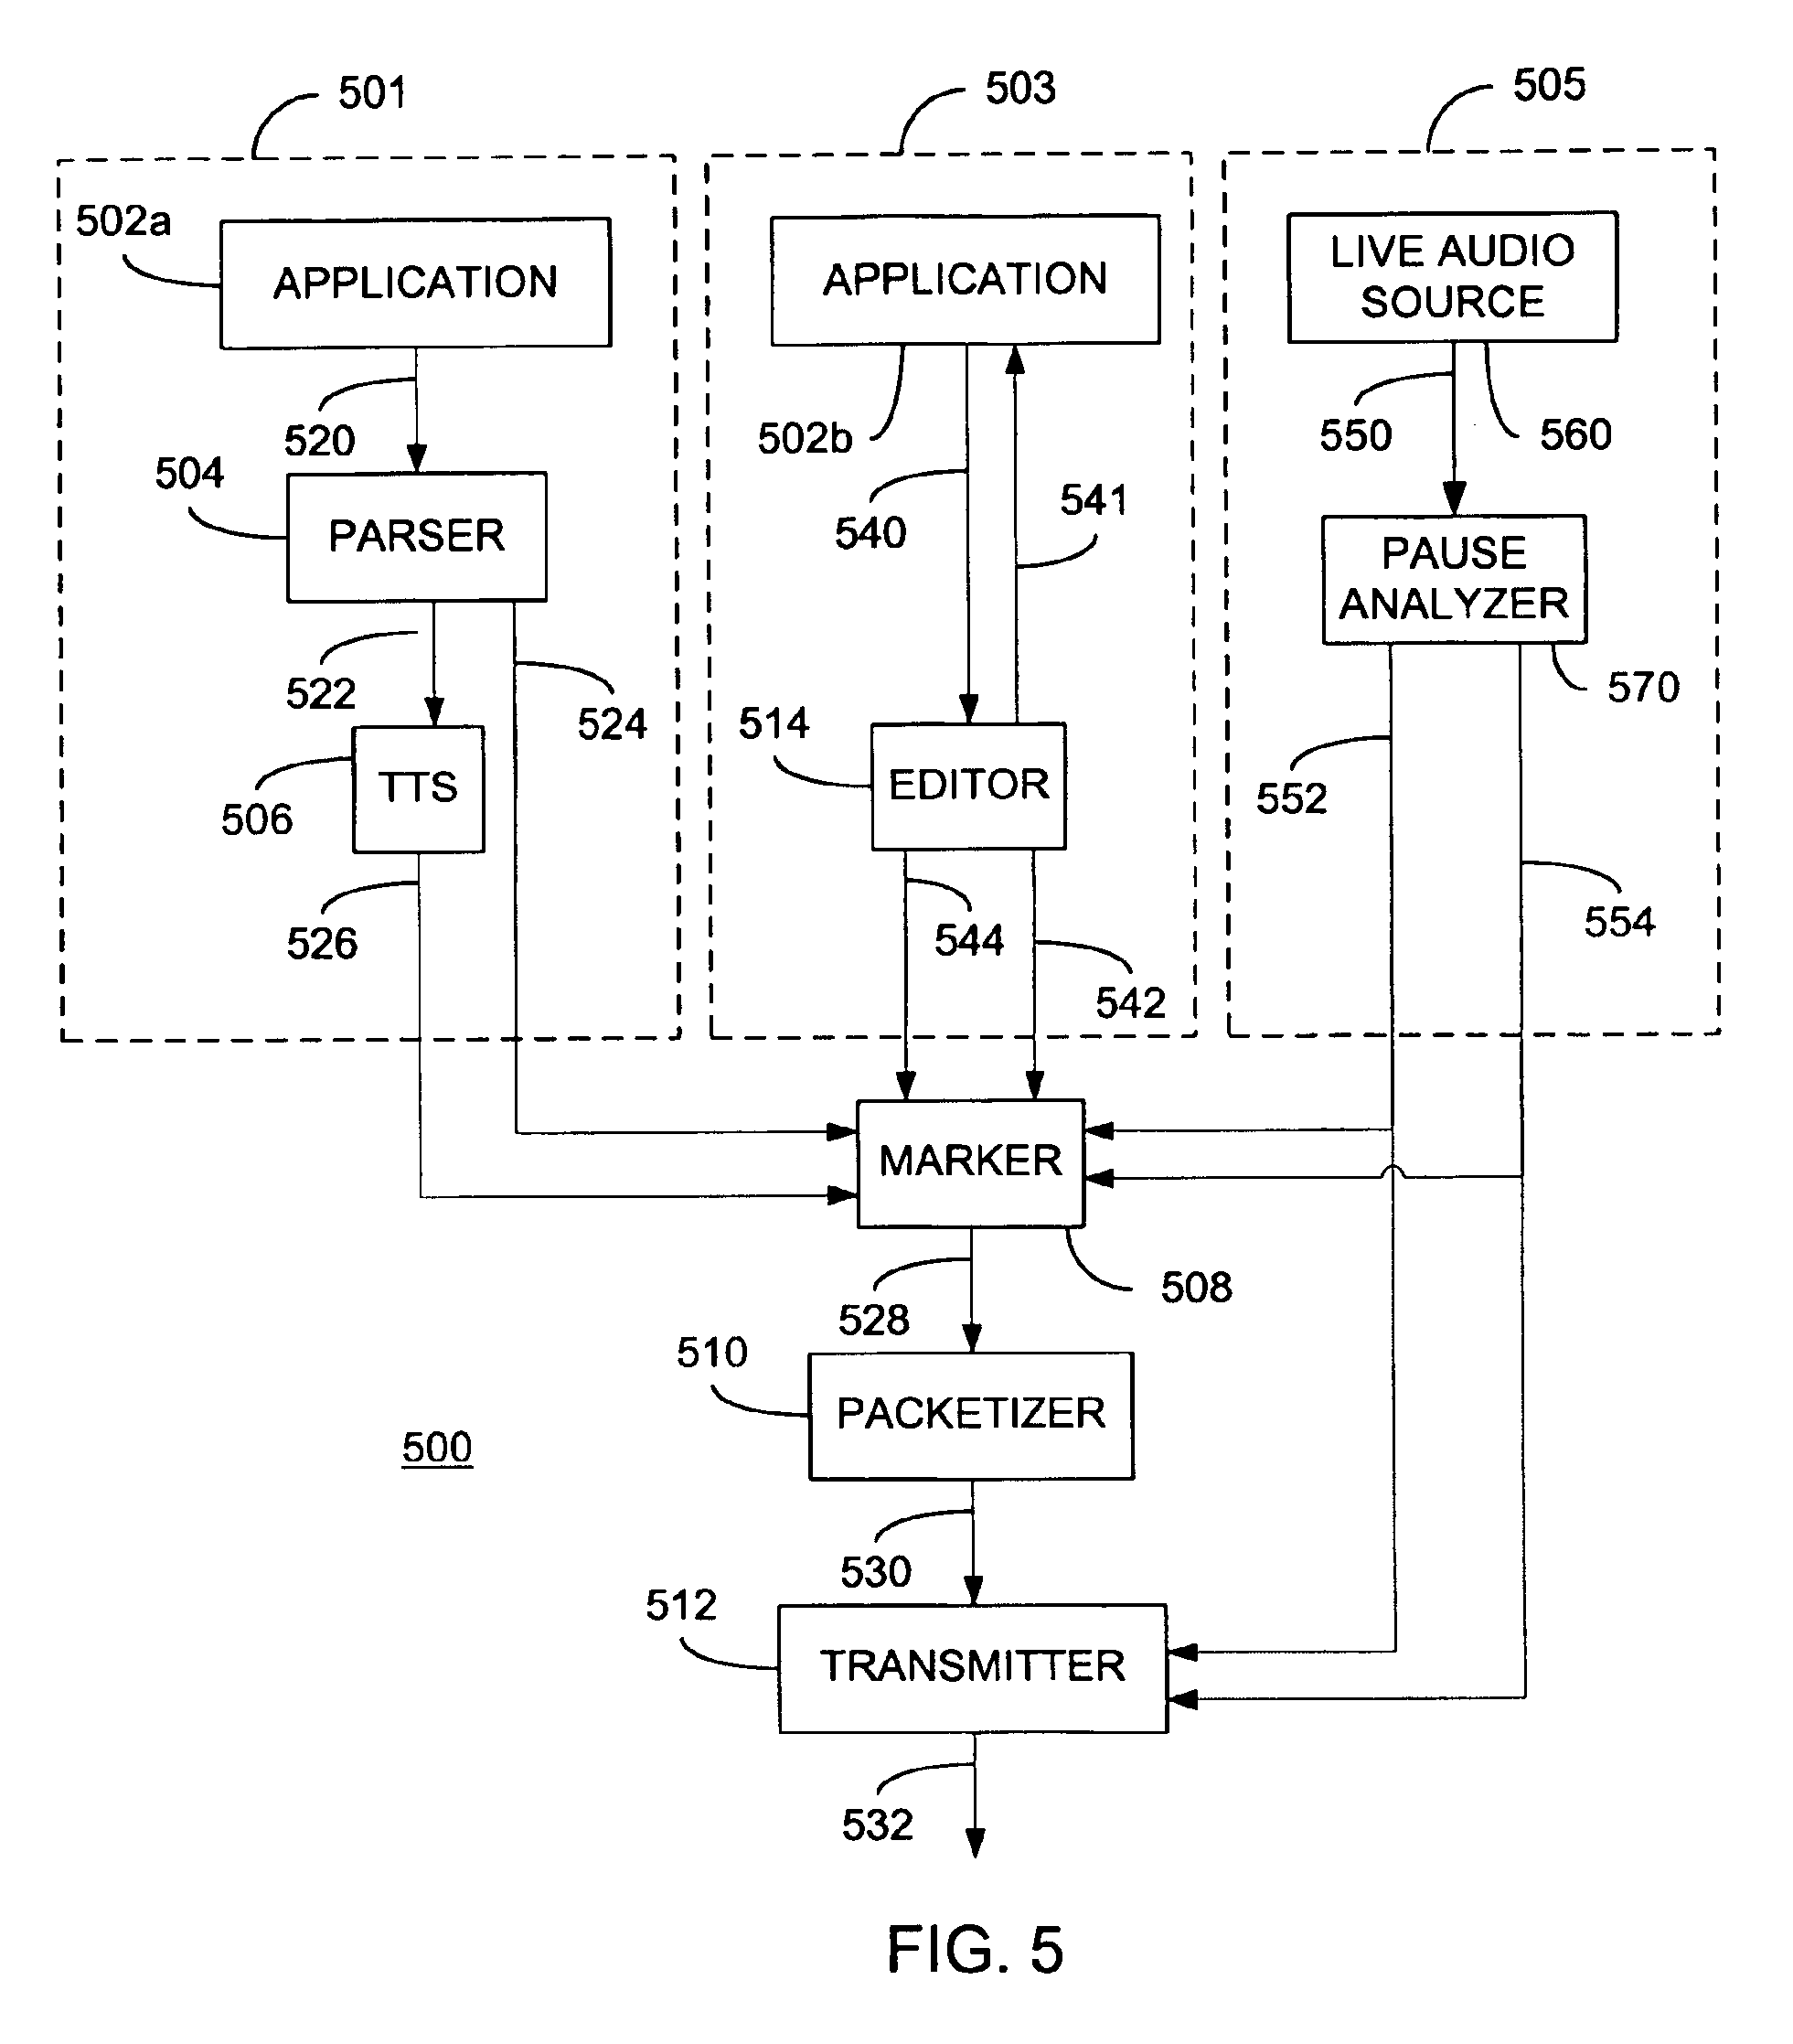 Method and apparatus for encoding and decoding pause information